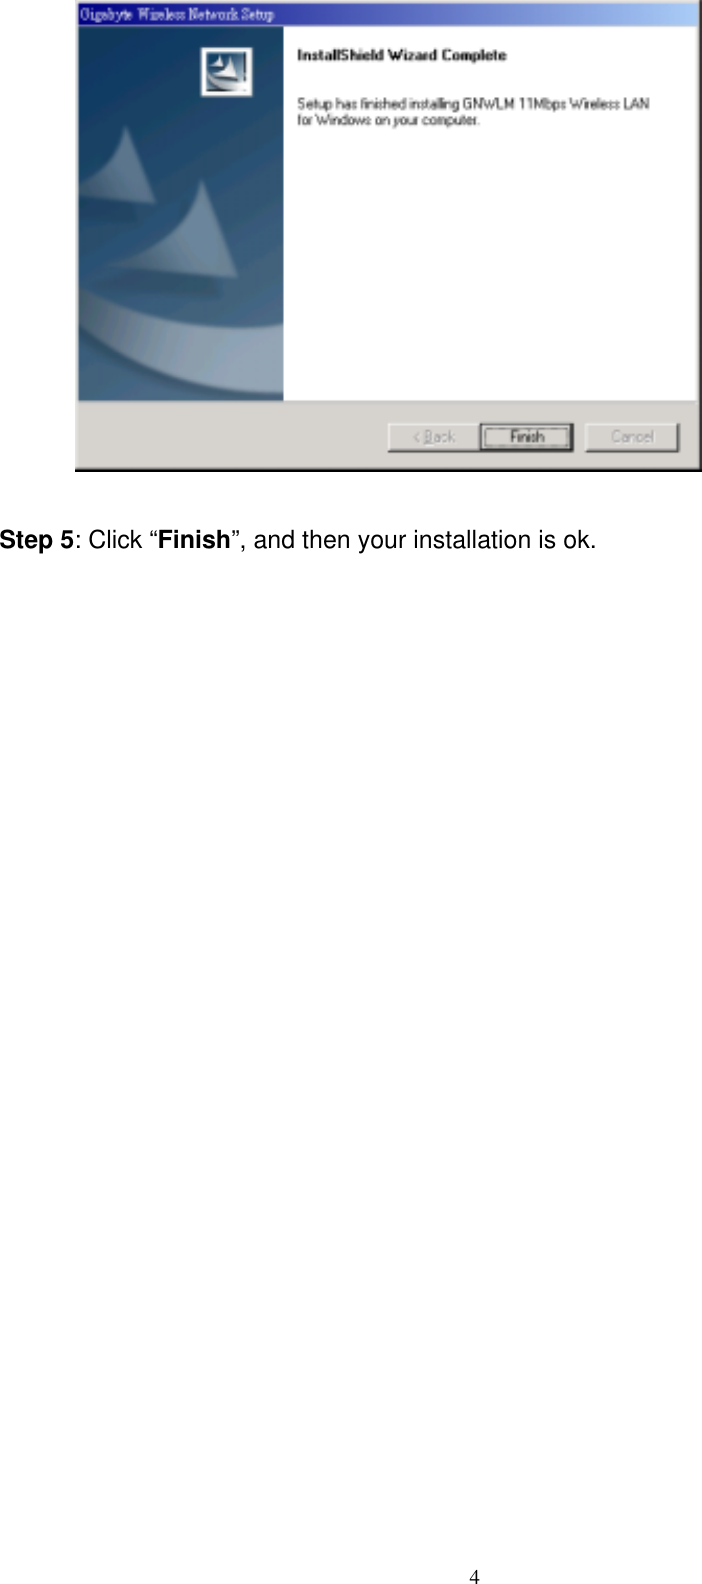   Step 5: Click “Finish”, and then your installation is ok.                                  4   